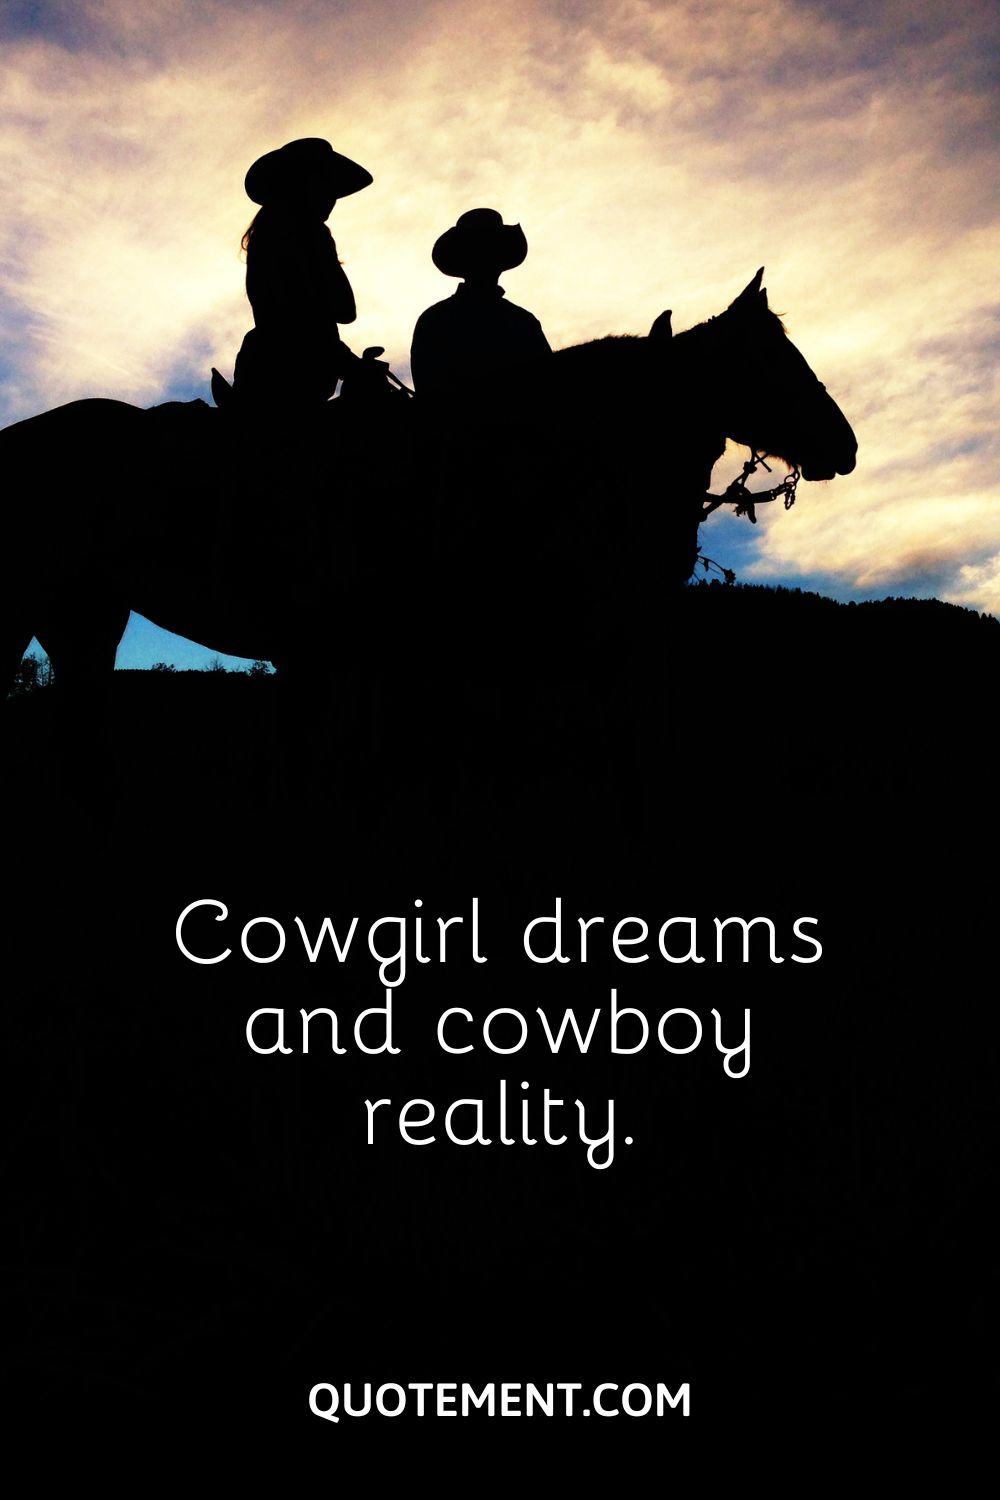 a cowgirl and cowboy riding horses
